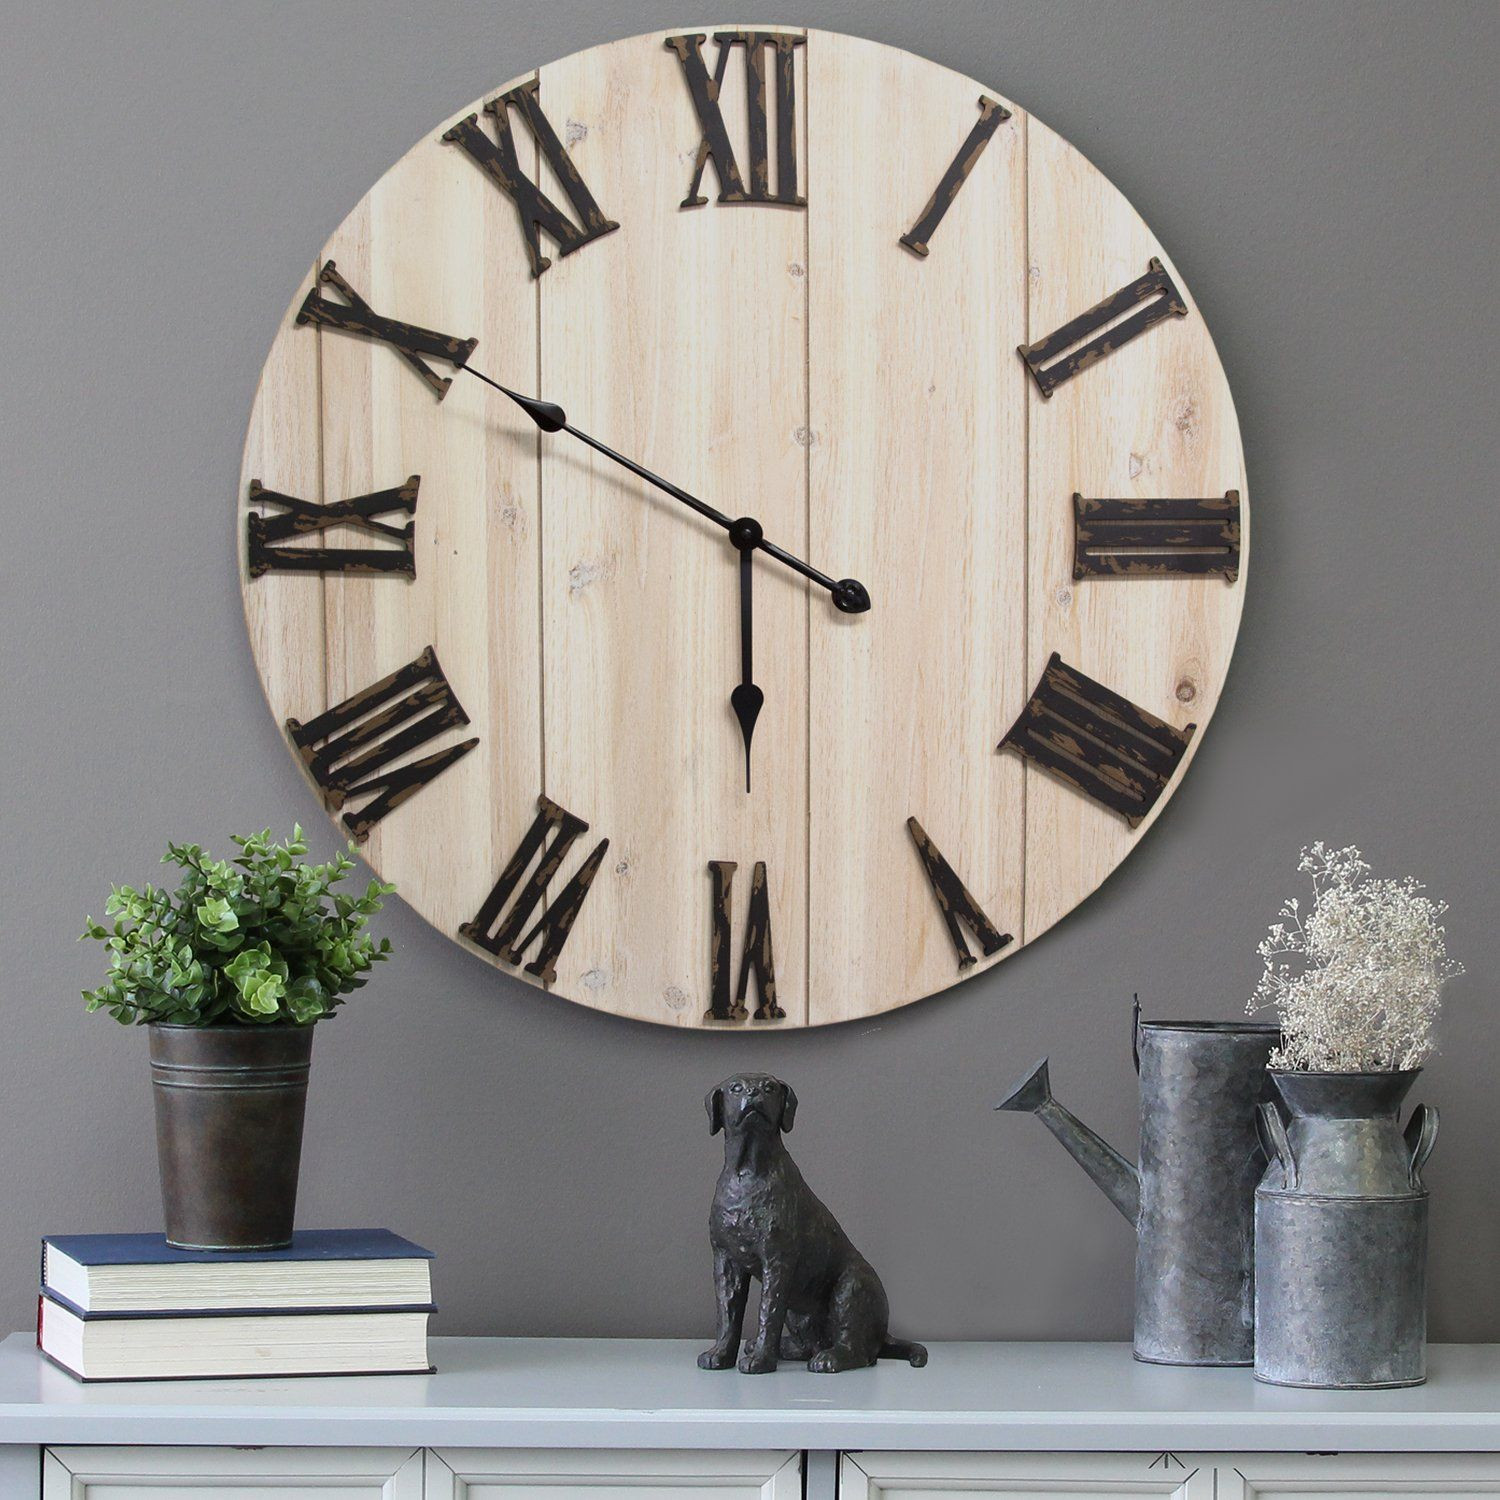 28" Round Distressed White Wood and Metal Wall Clock